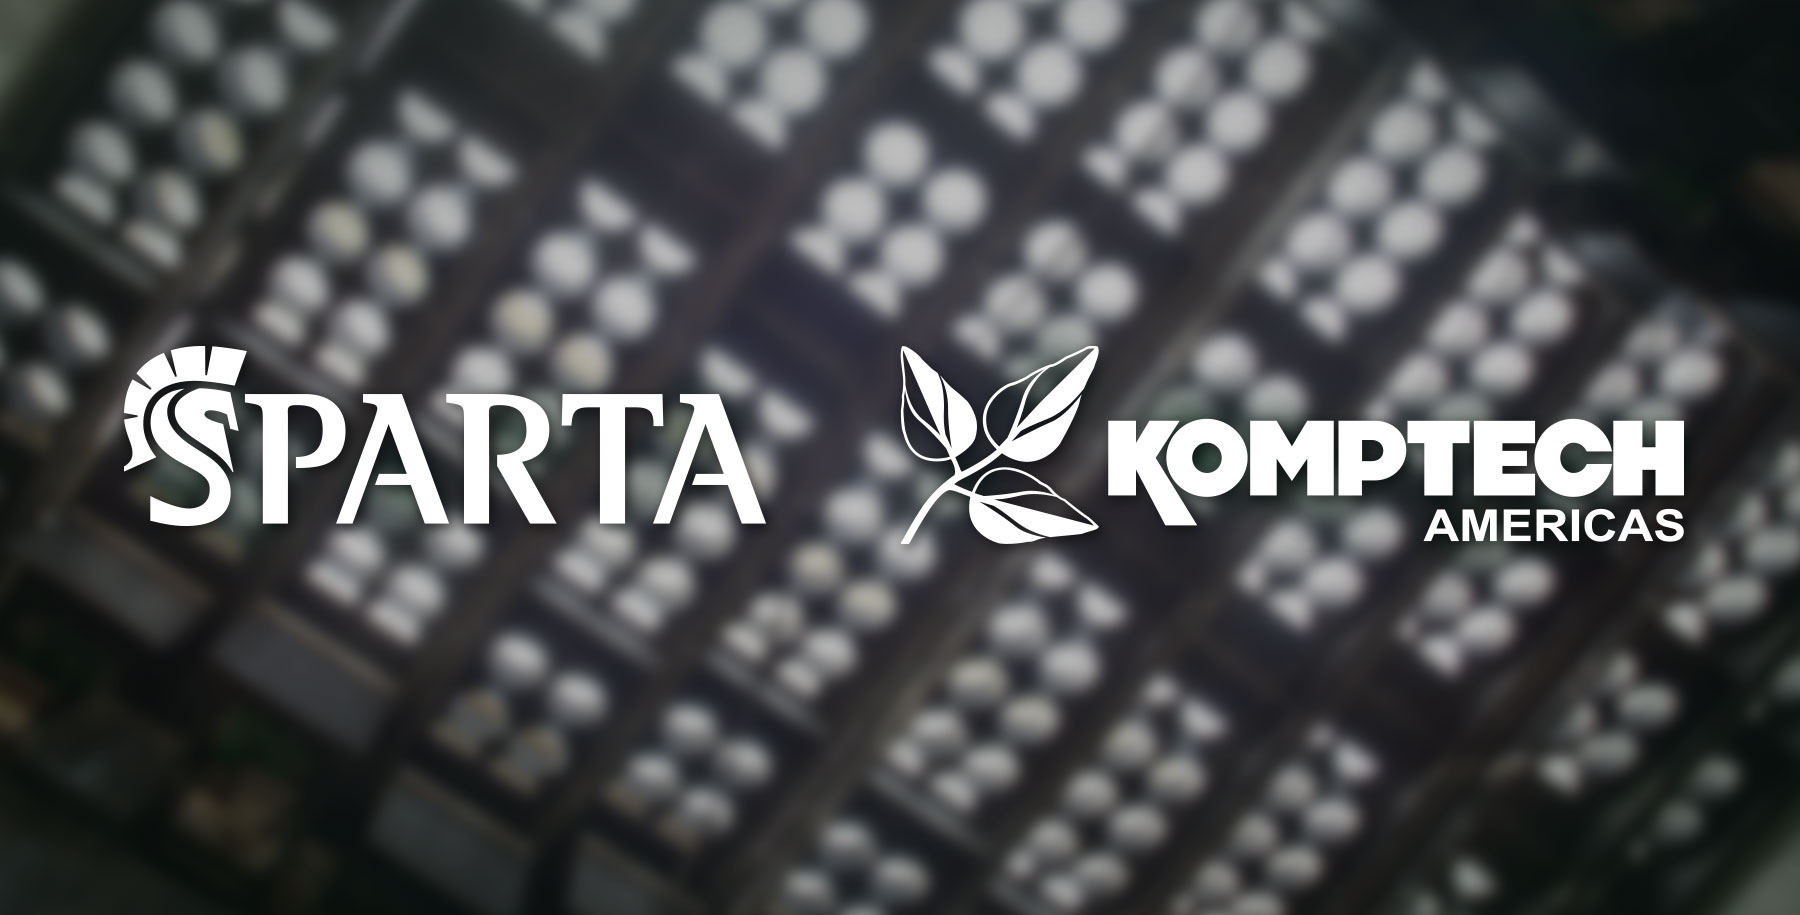 Sparta Manufacturing and Komptech Americas